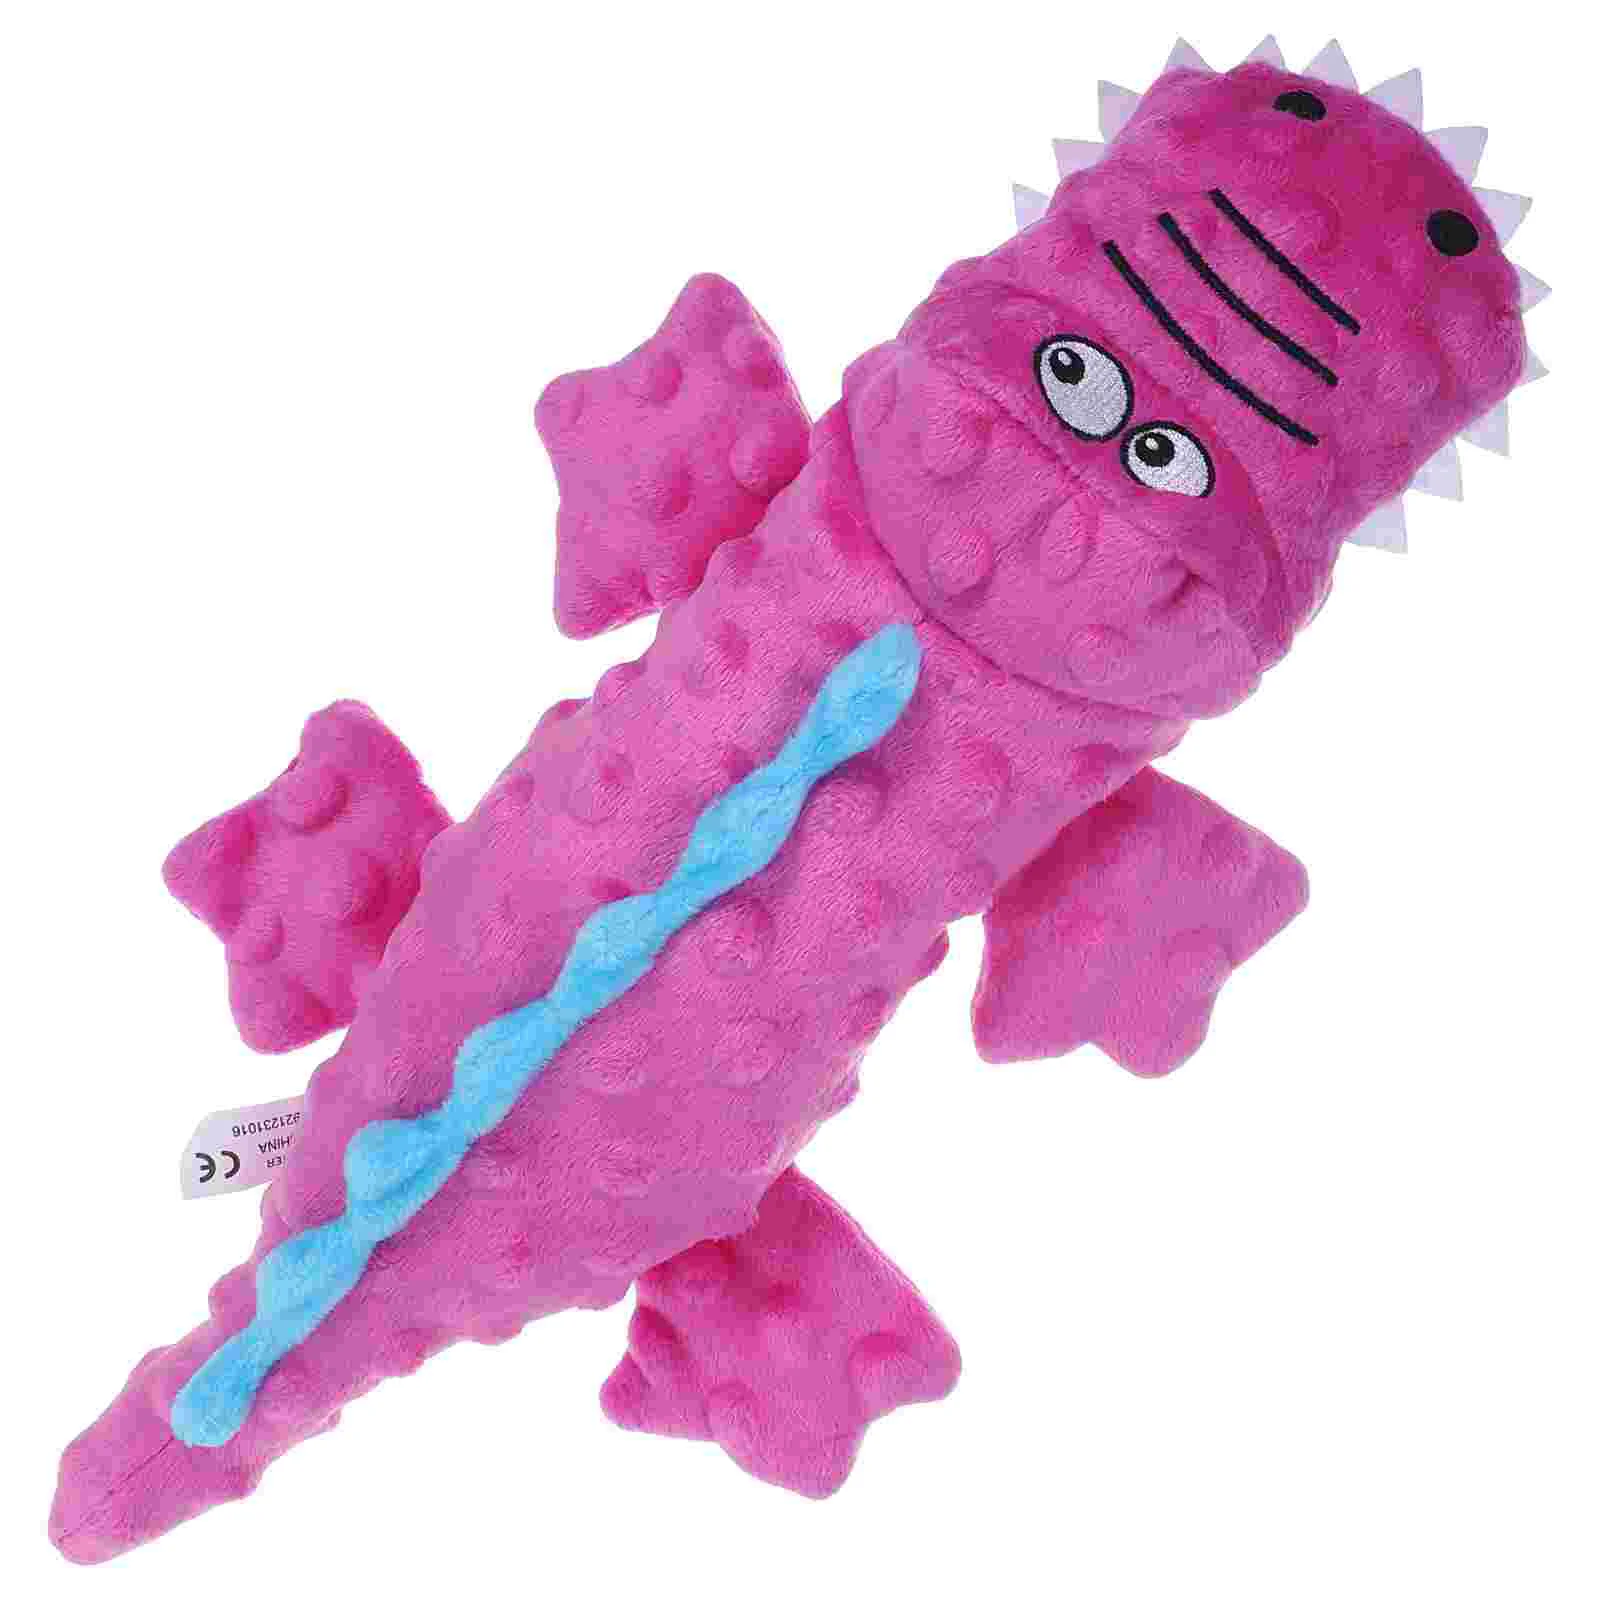 

Dog Chew Toy Squeaky Crocodile Shaped Puppy Teething Plaything Puppy Chewing Toy